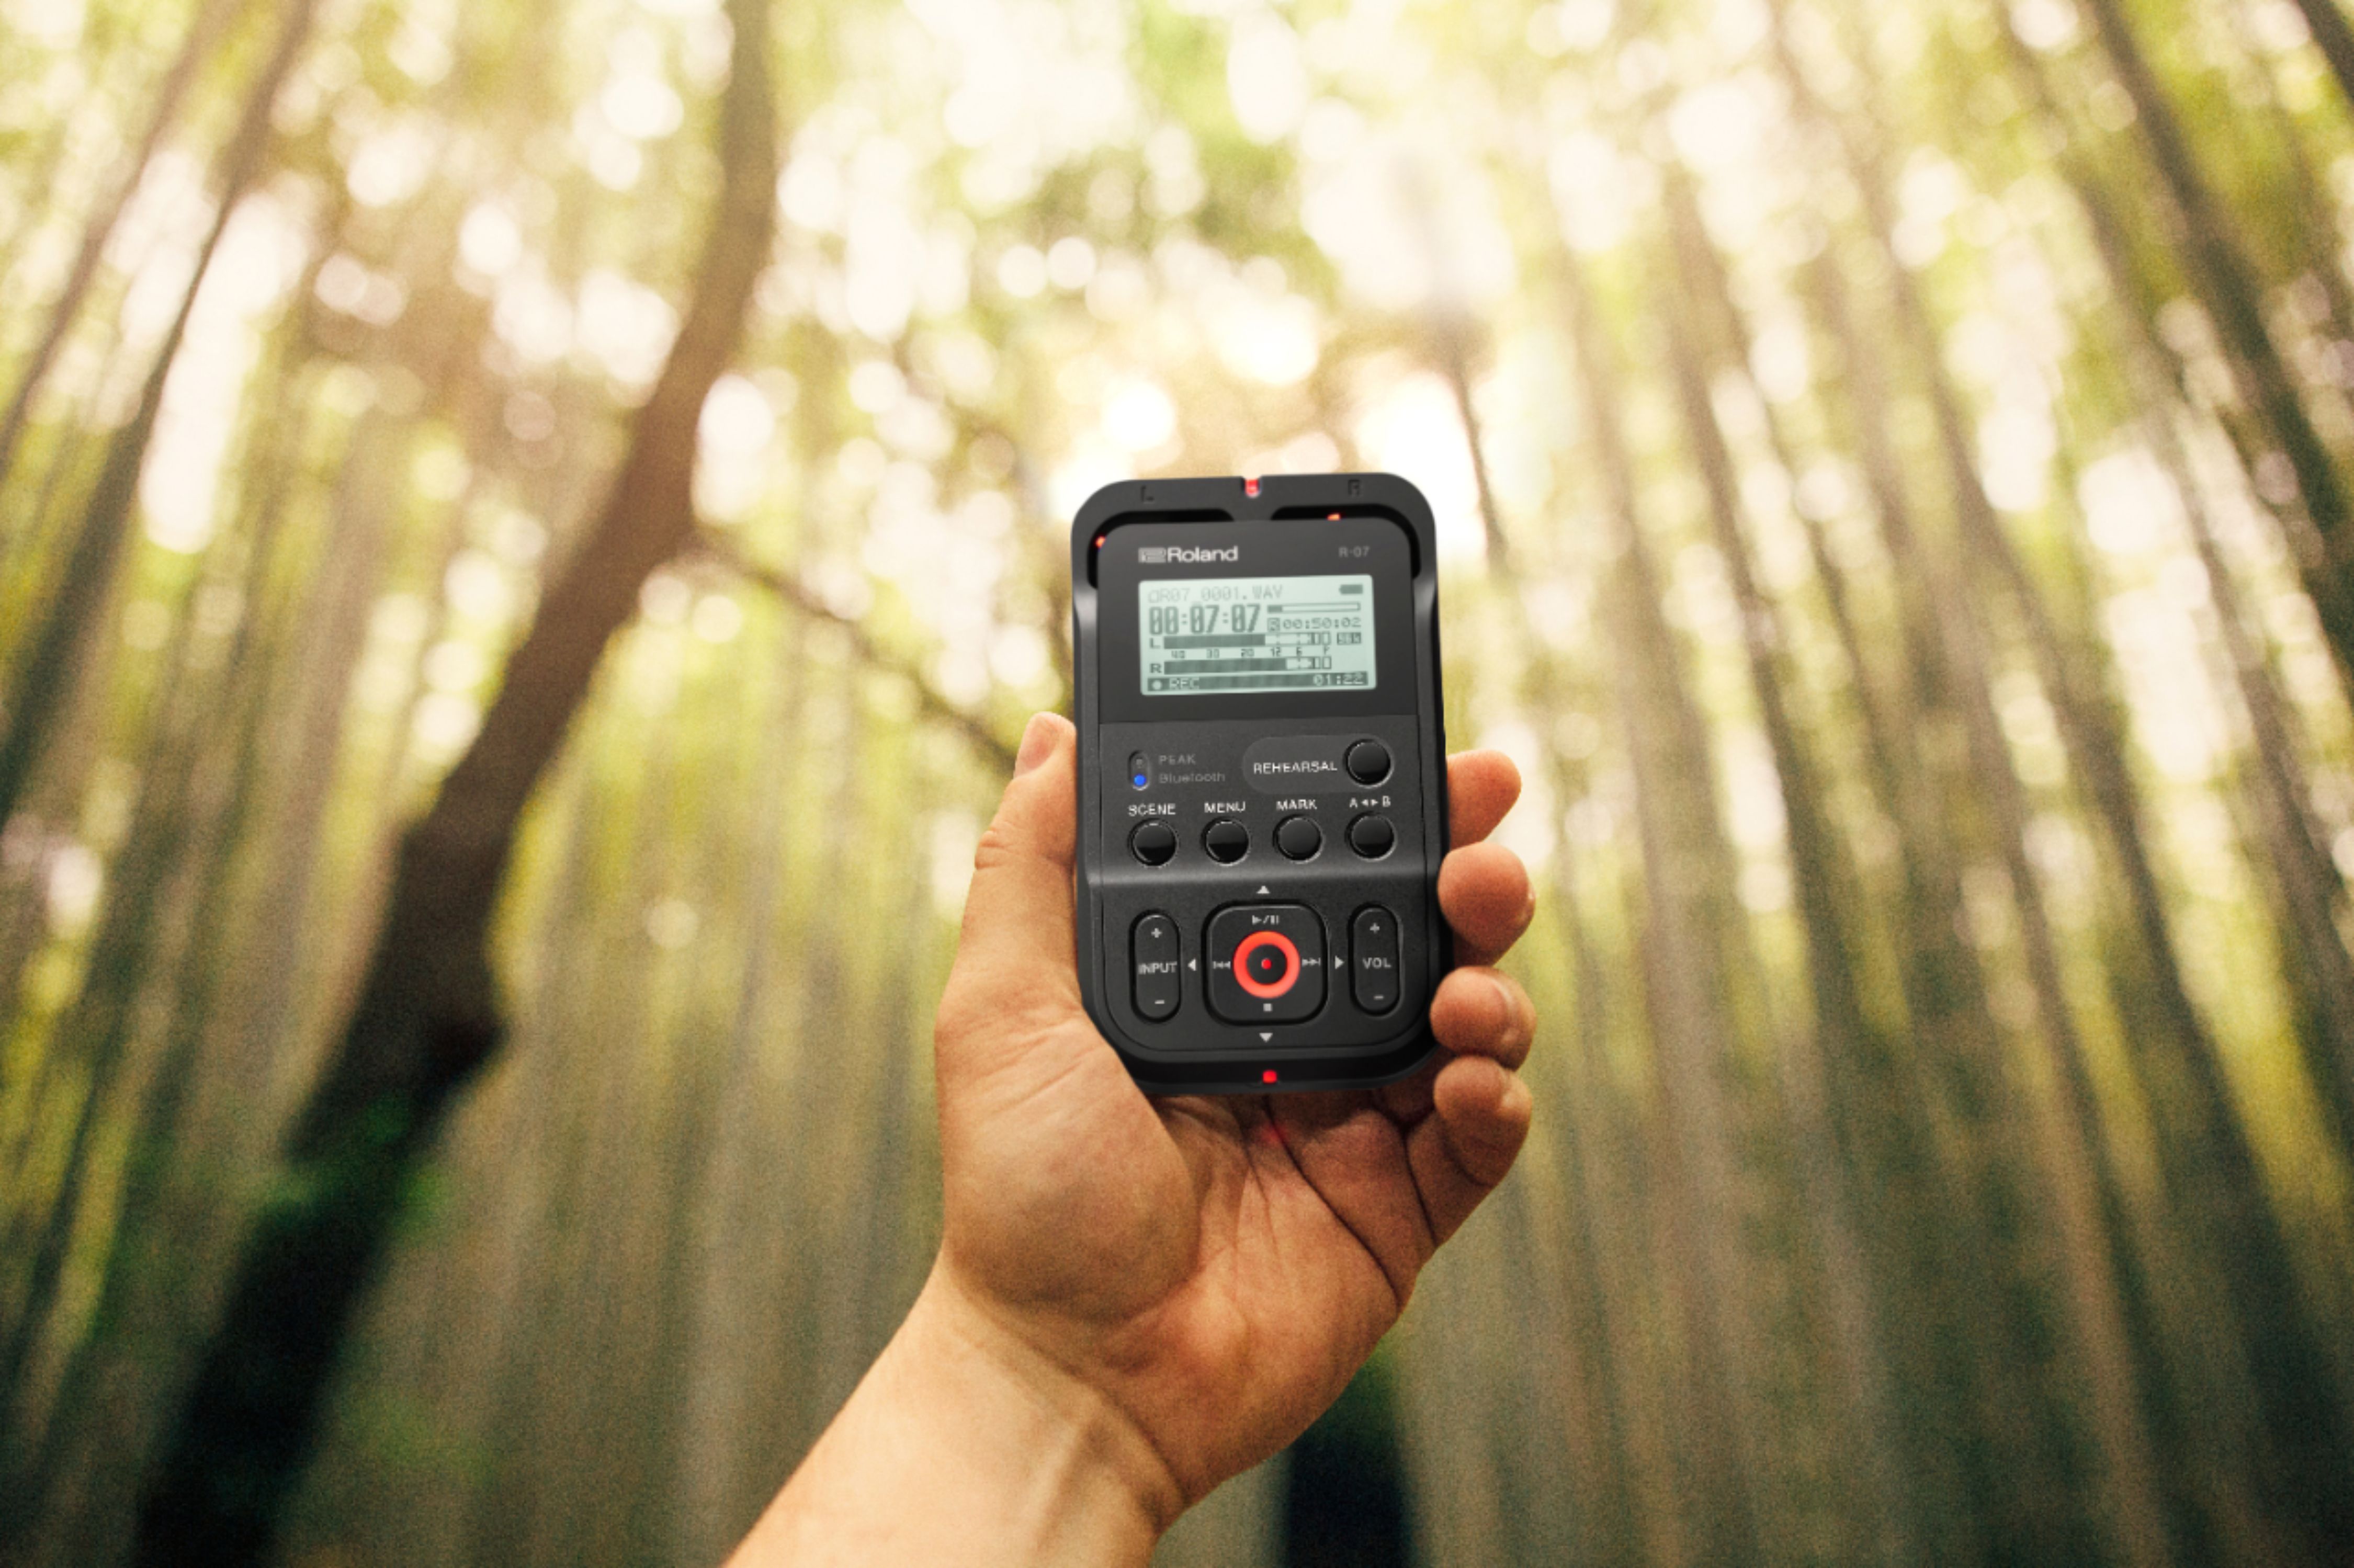 Angle View: TASCAM - Stereo Handheld Digital Audio Recorder and USB Audio Interface